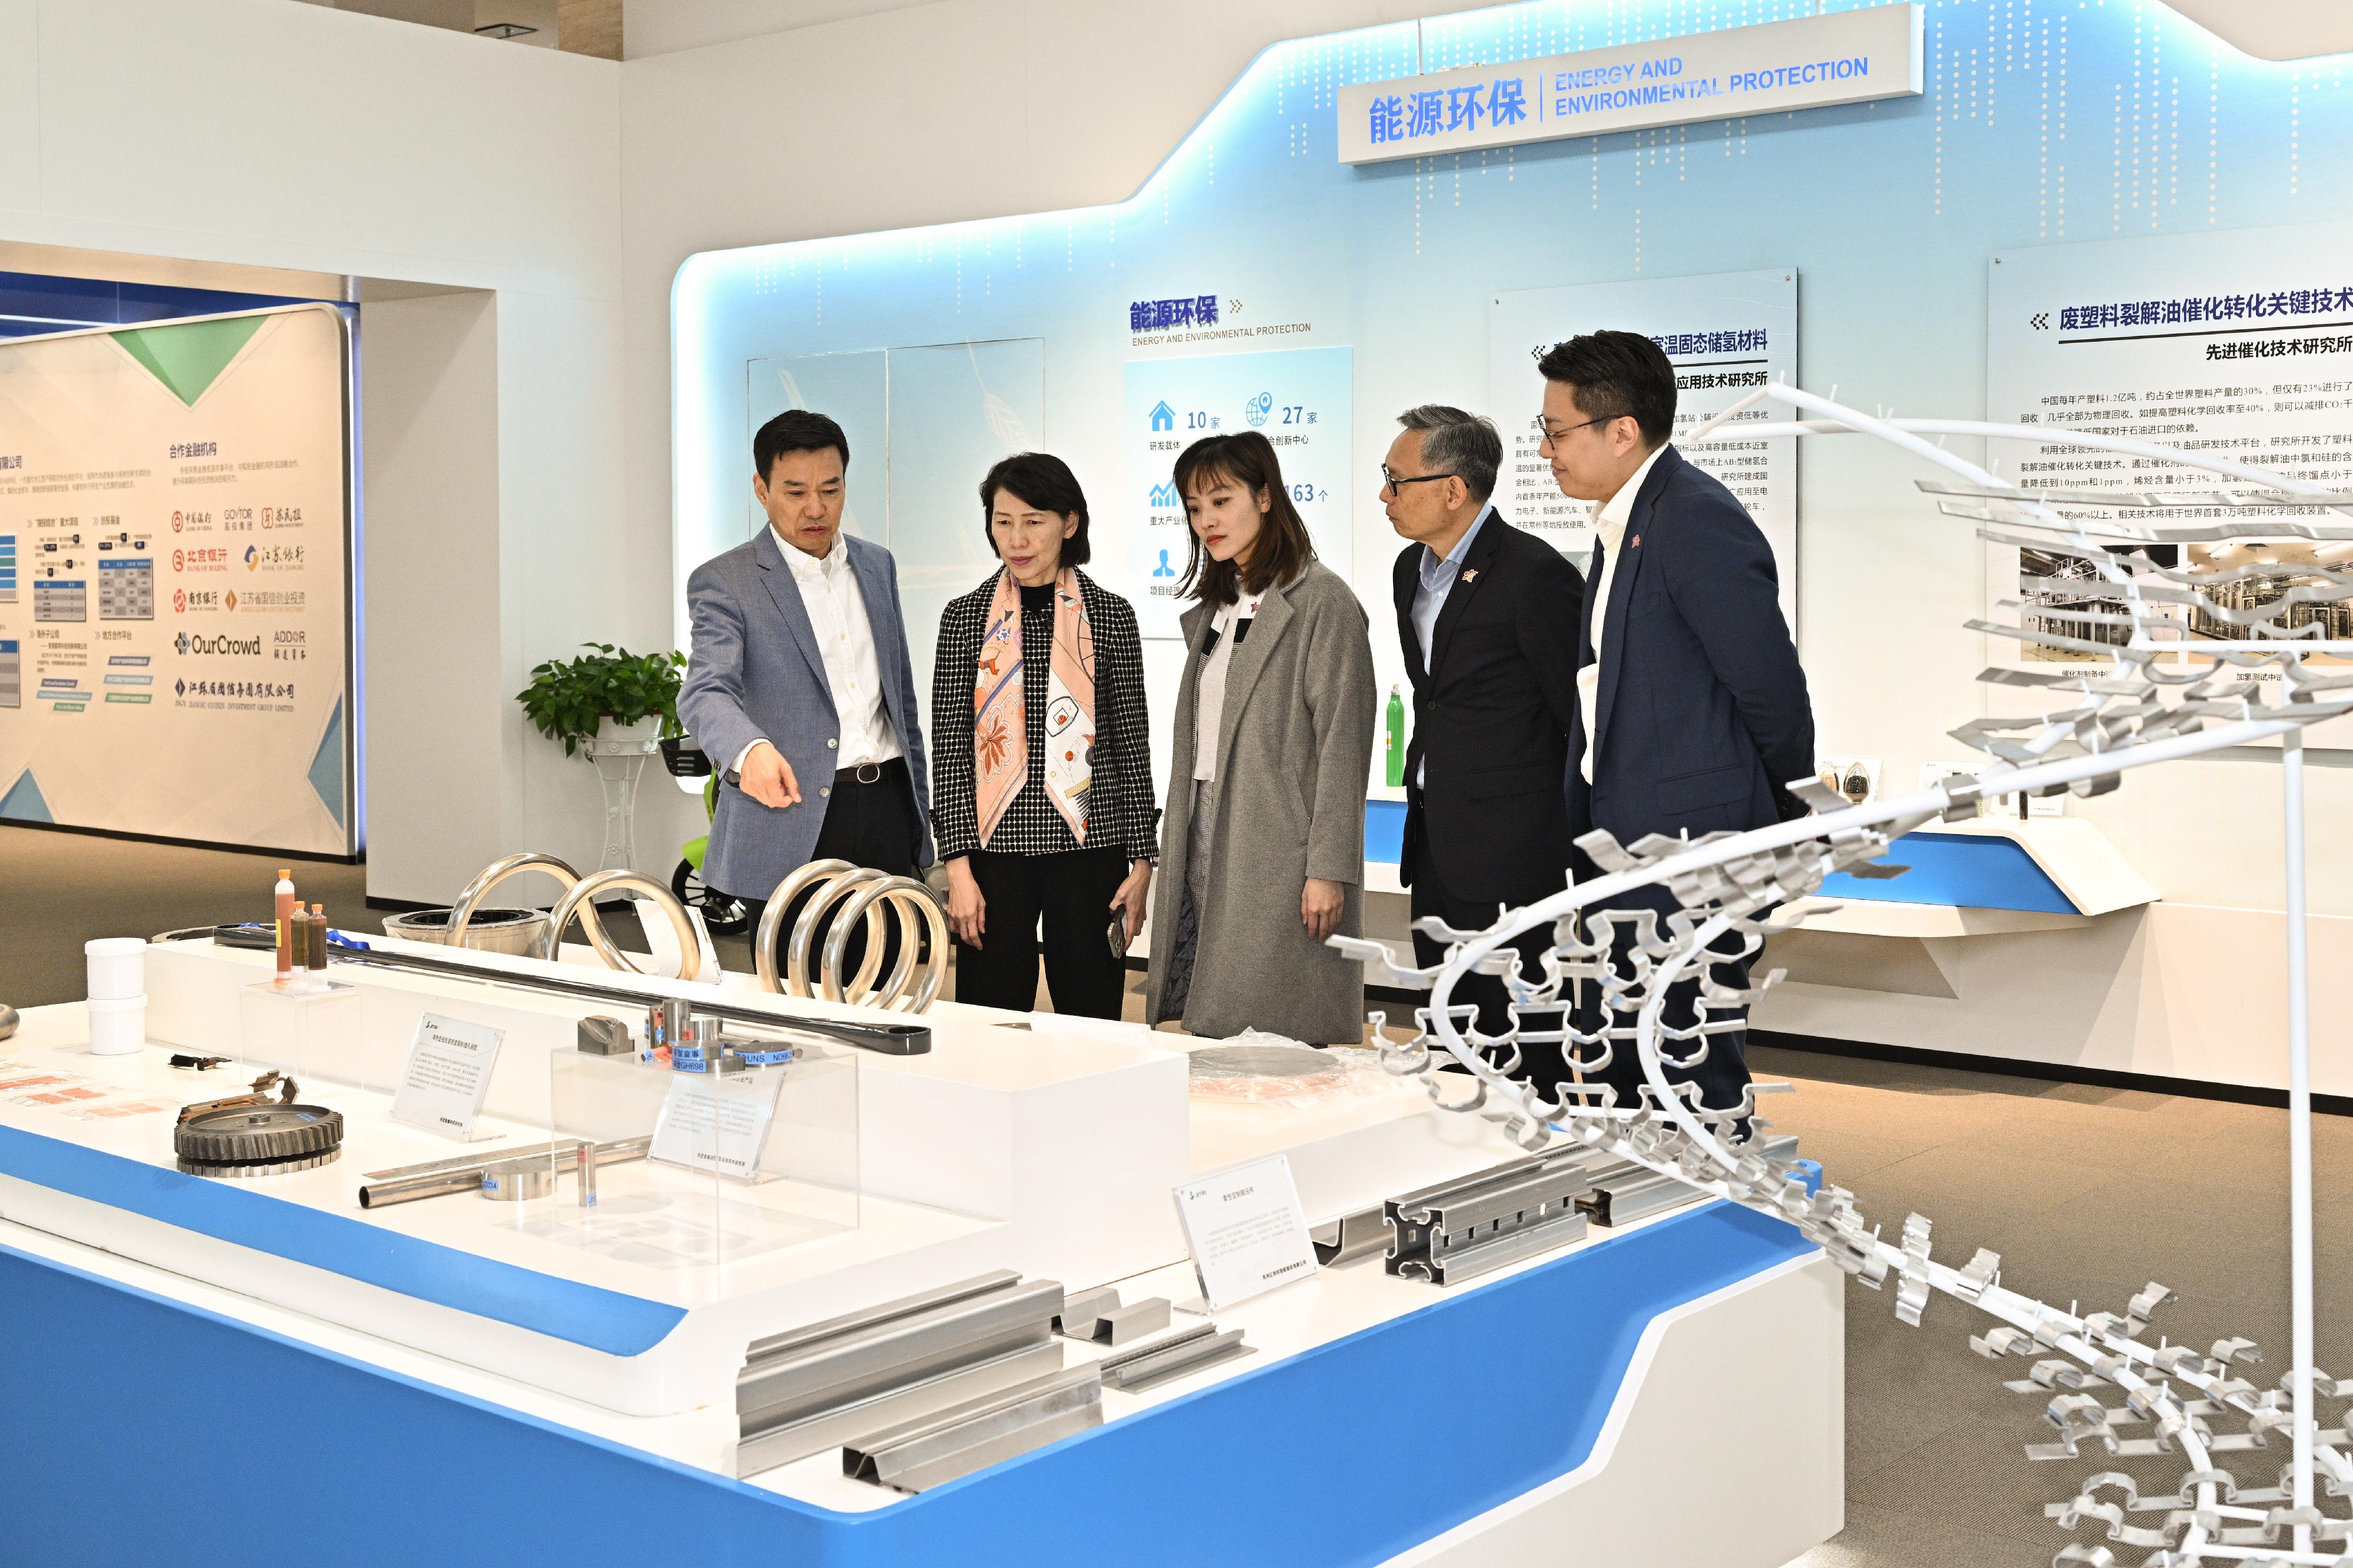 The delegation of politically appointed officials on a national studies programme and duty visit led by the Director of the Chief Executive's Office, Ms Carol Yip (second left), visited the Jiangsu Industrial Technology Research Institute in Nanjing today (November 24) to learn more about the practical experience of high-quality development.